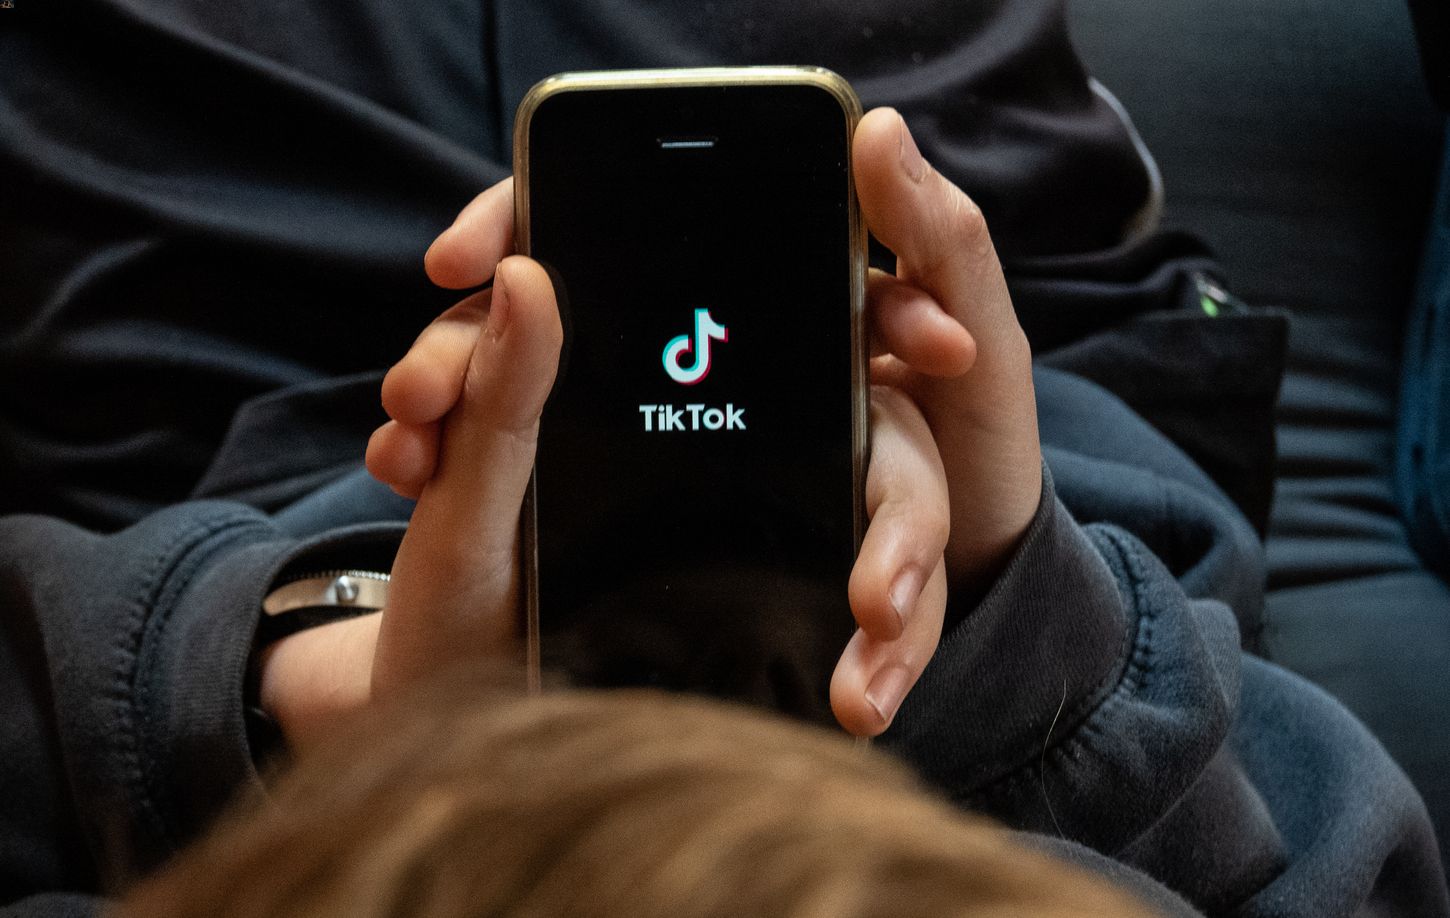 how-to-recover-tiktok-account-without-password-email-or-phone-number